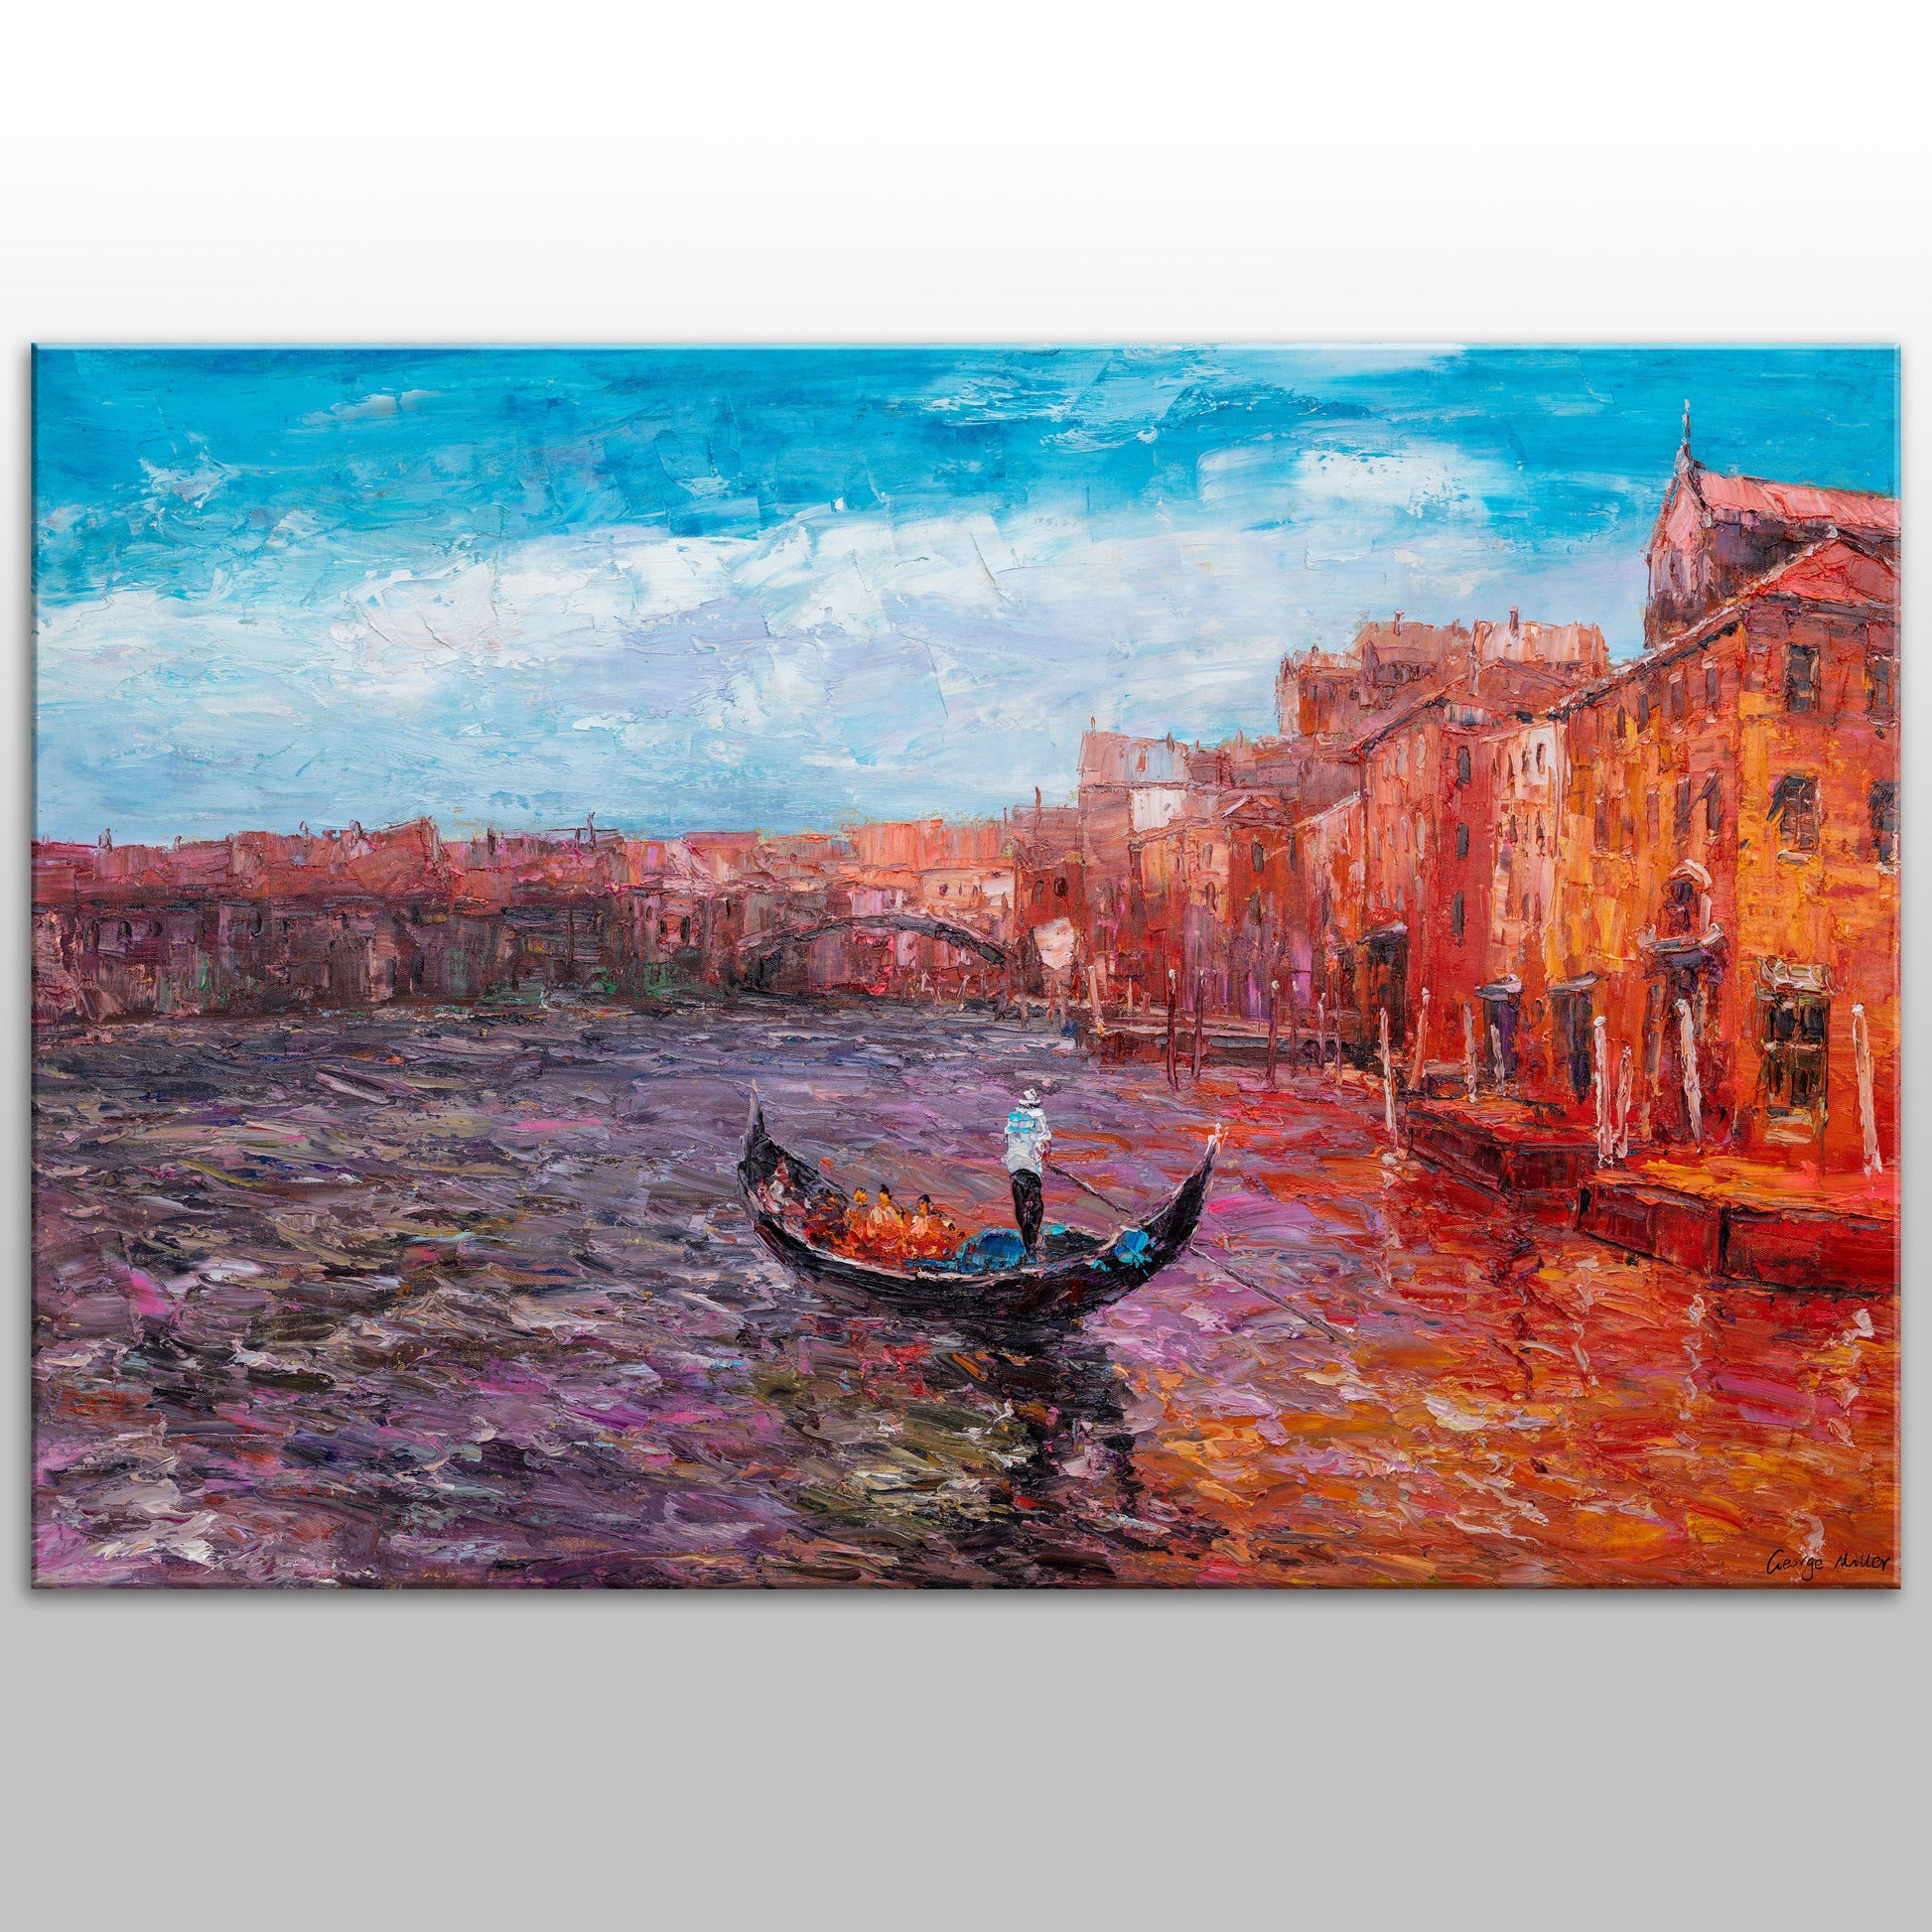 Original Oil Painting Venice Grand Canal Gondola, Abstract Painting, Modern Art, Large Canvas Painting, Wall Decor, Landscape Oil Painting